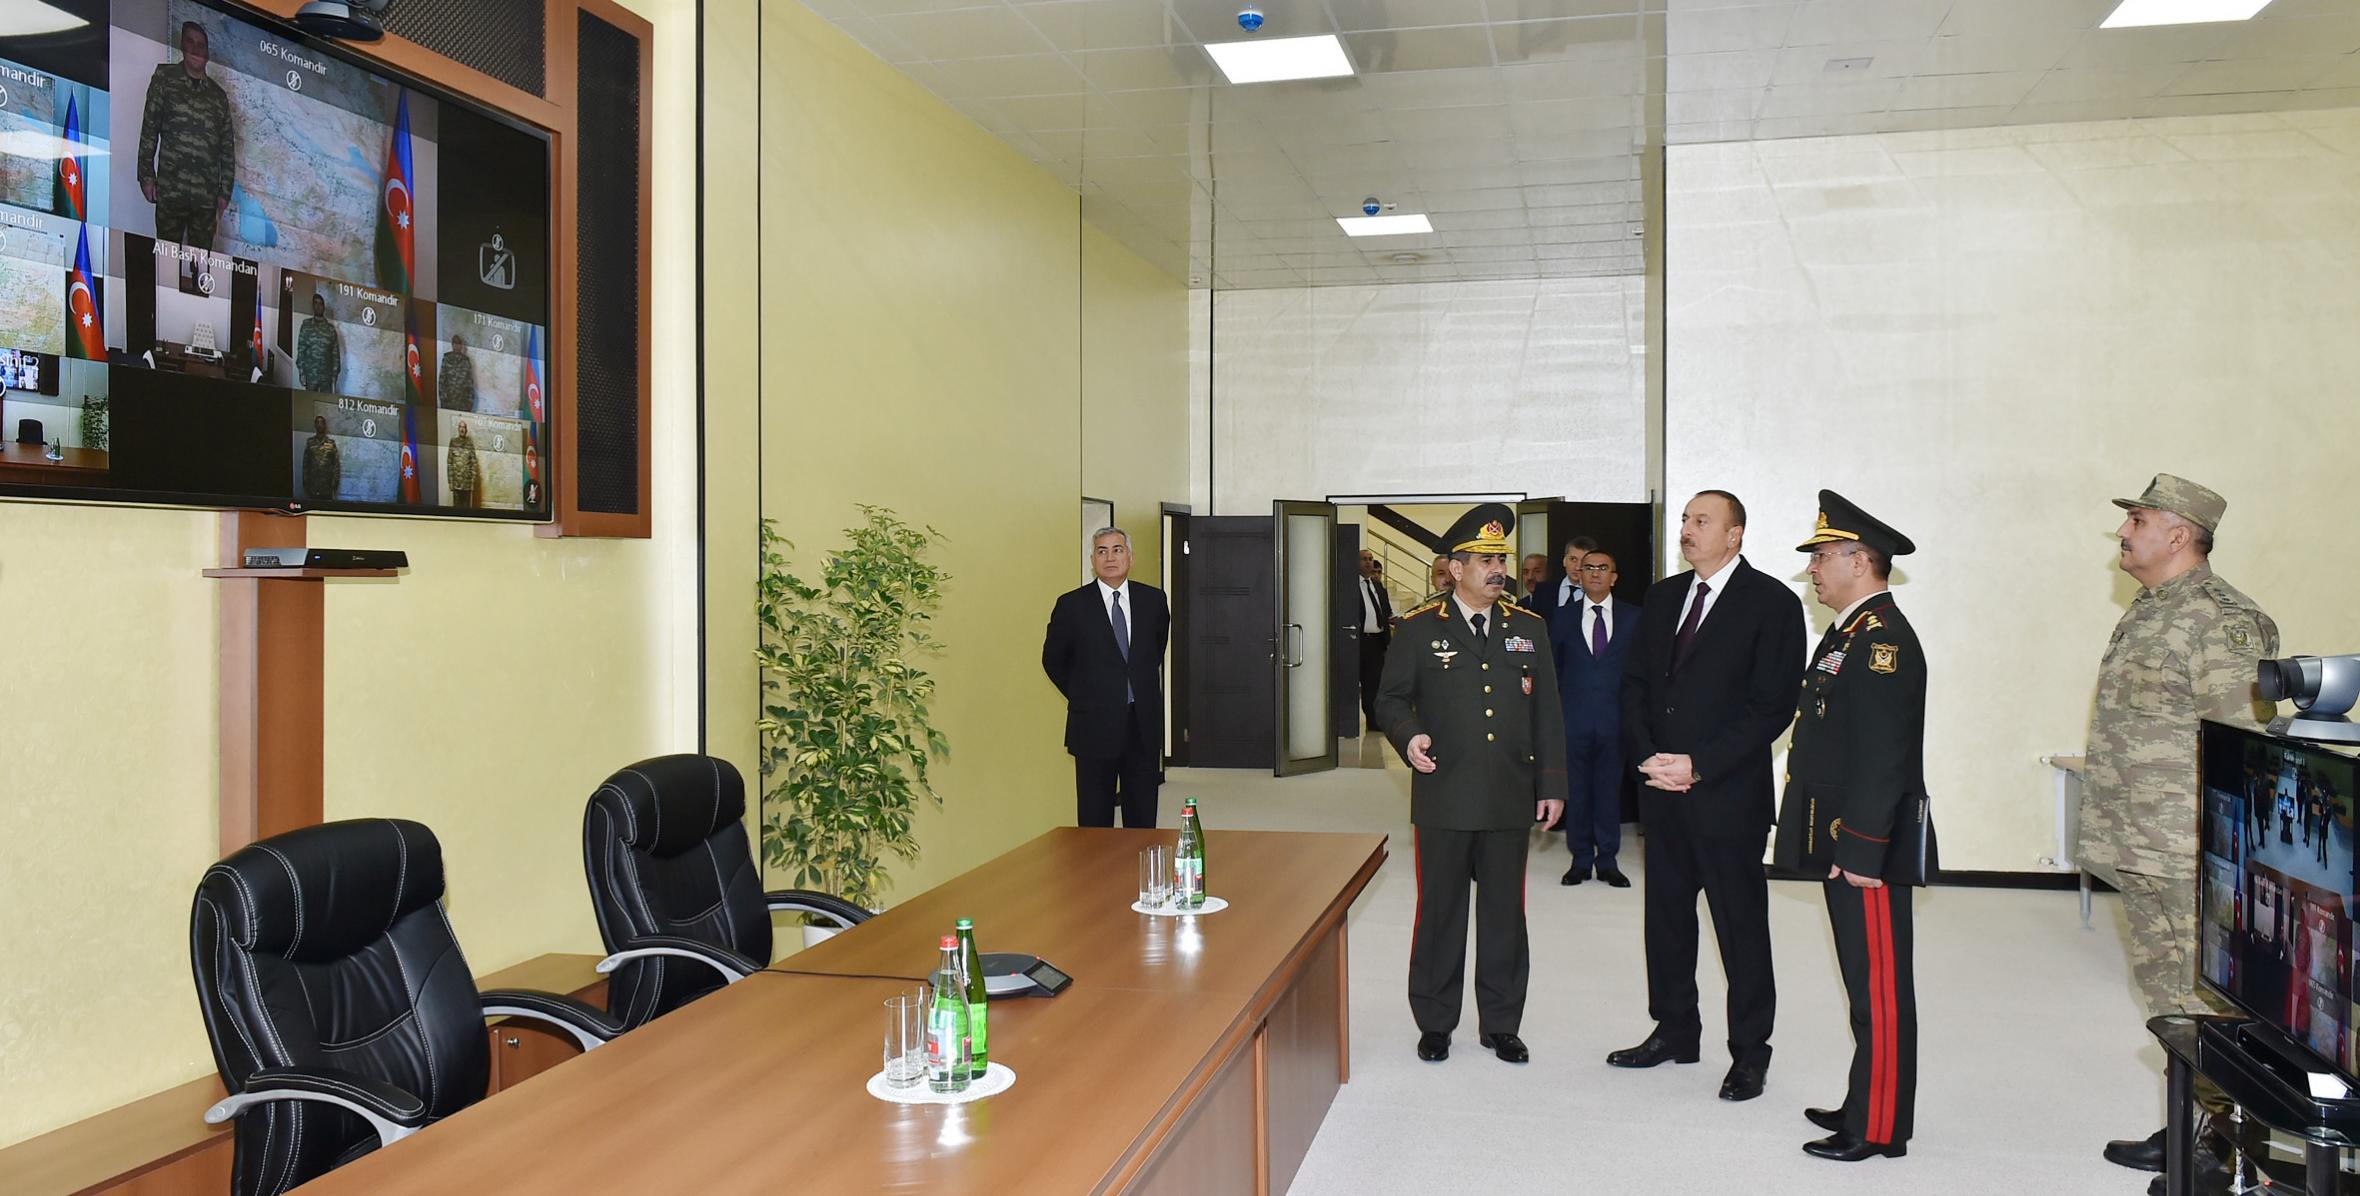 Ilham Aliyev attended the opening of a new building of the headquarters in the military town of Shamkir military formation